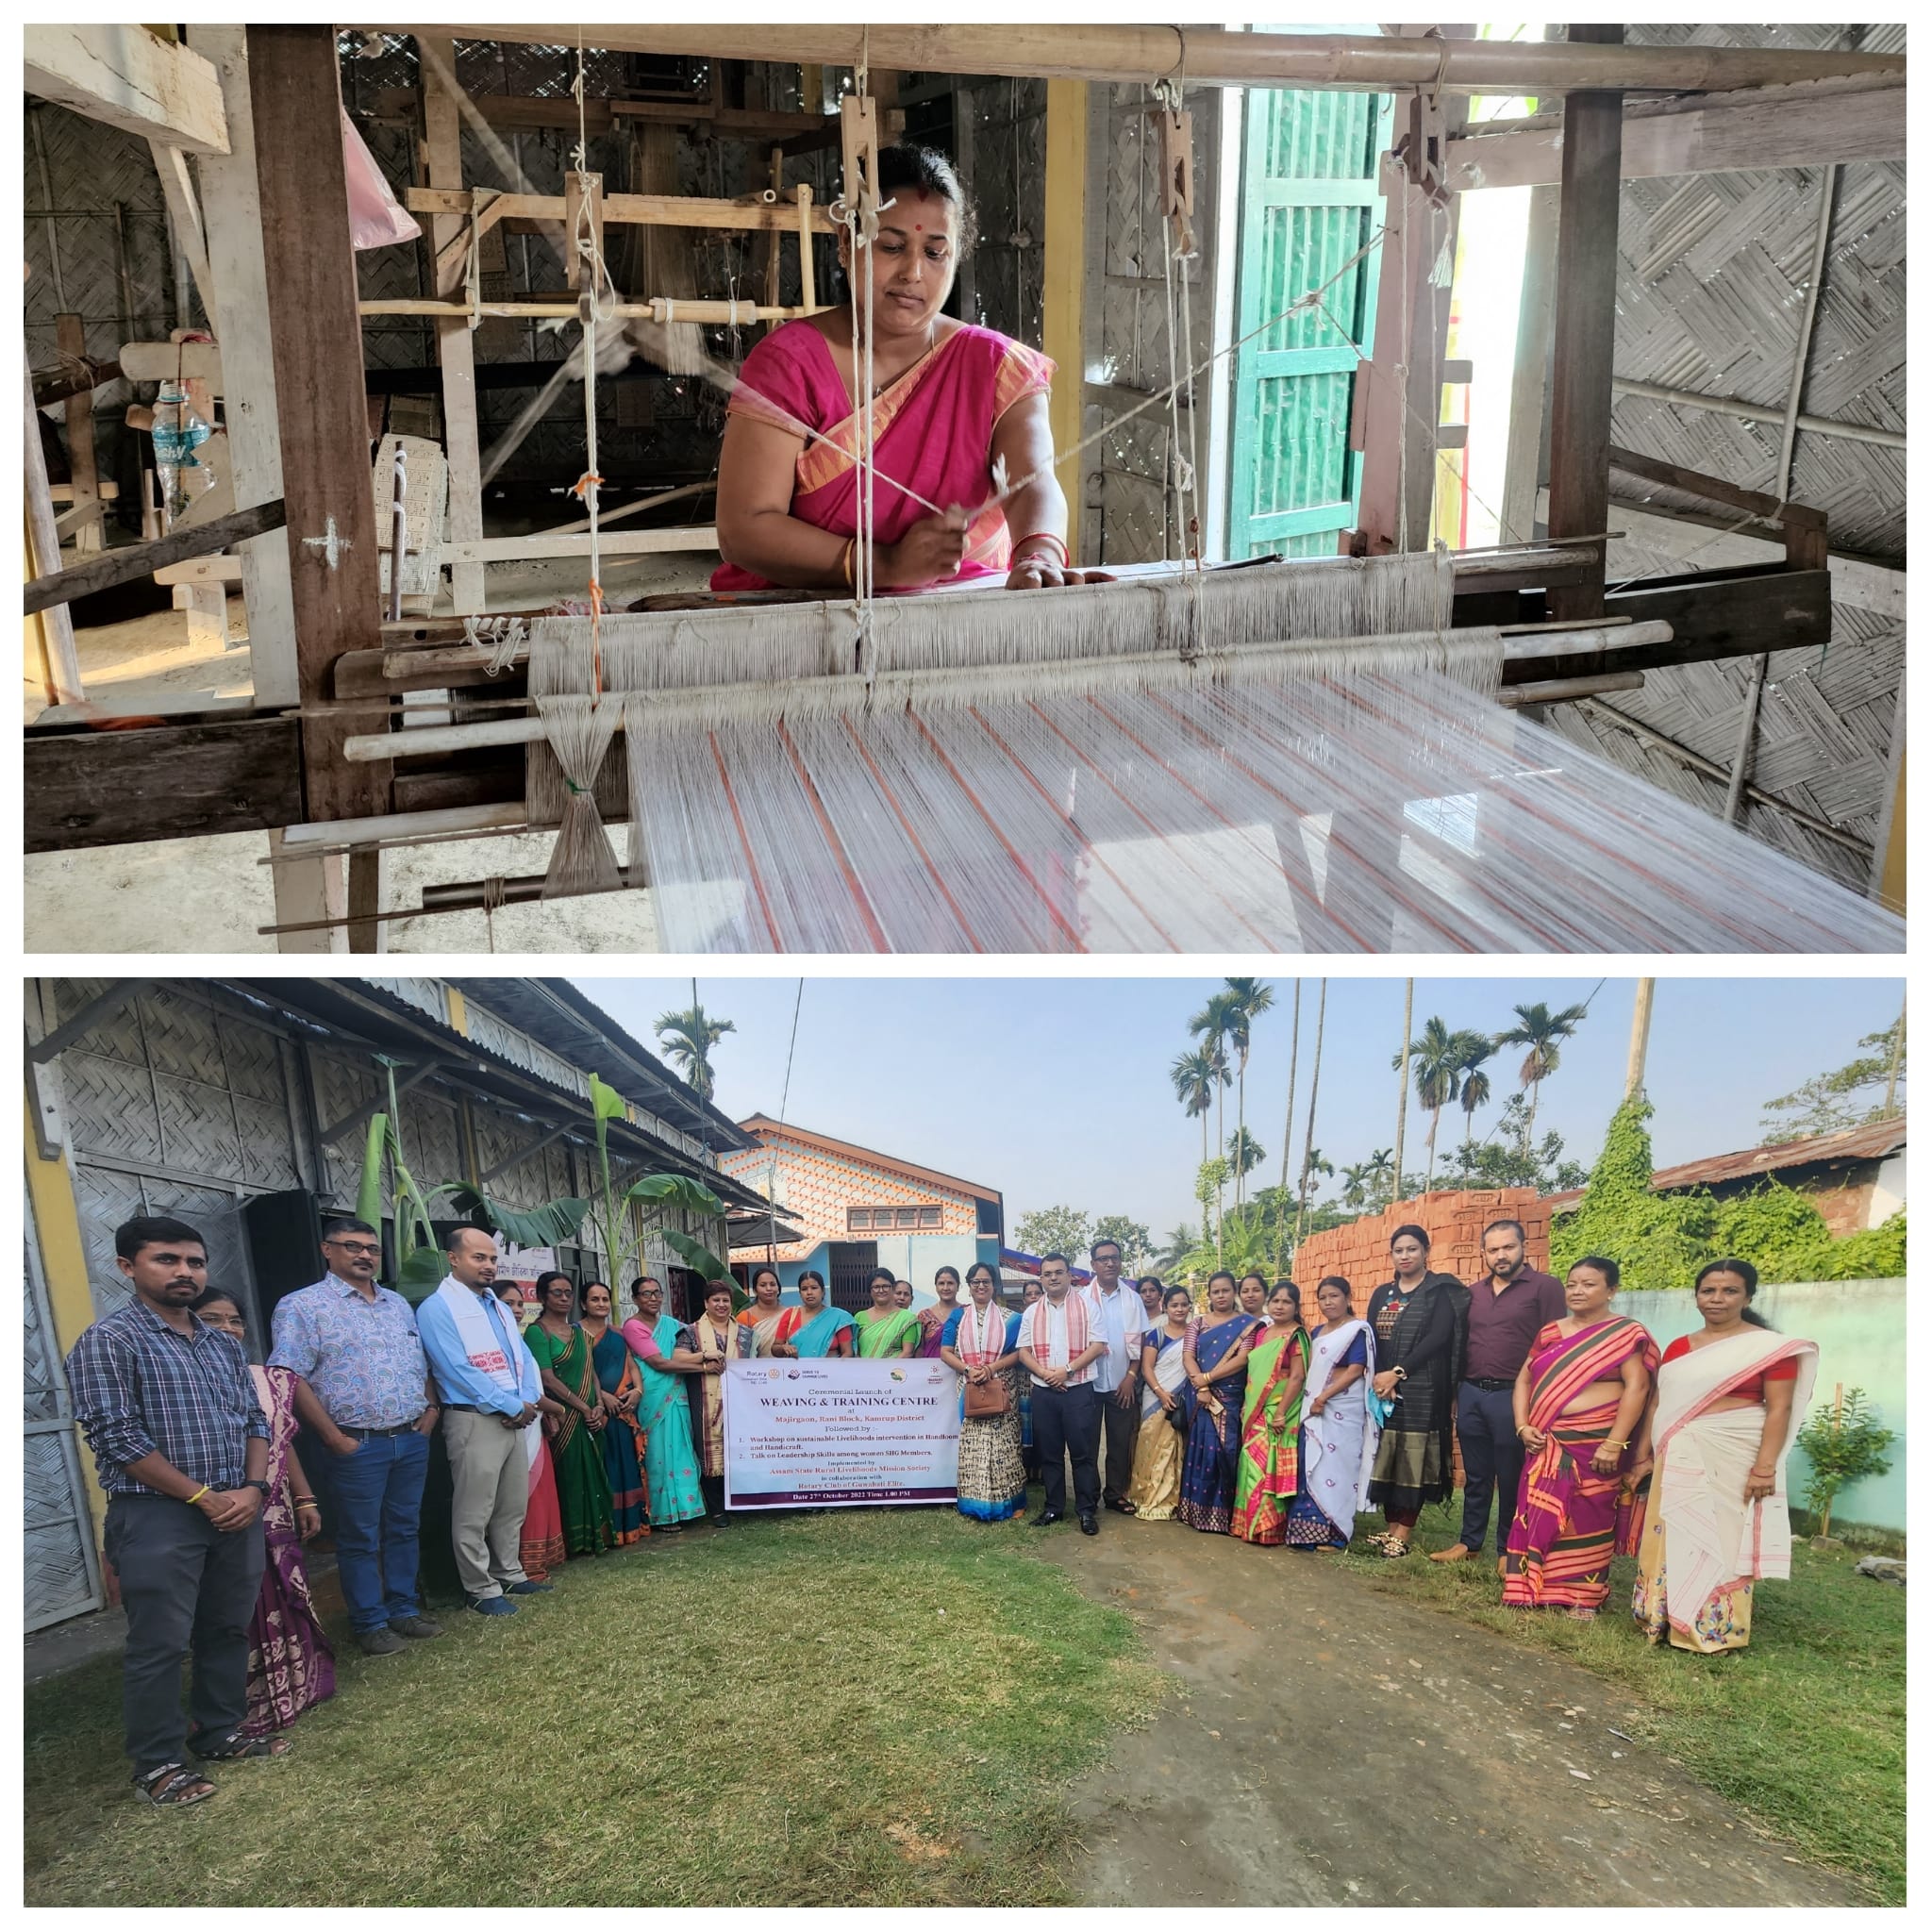 Project on Women Empowerment by launching Weaving and Training Centre.